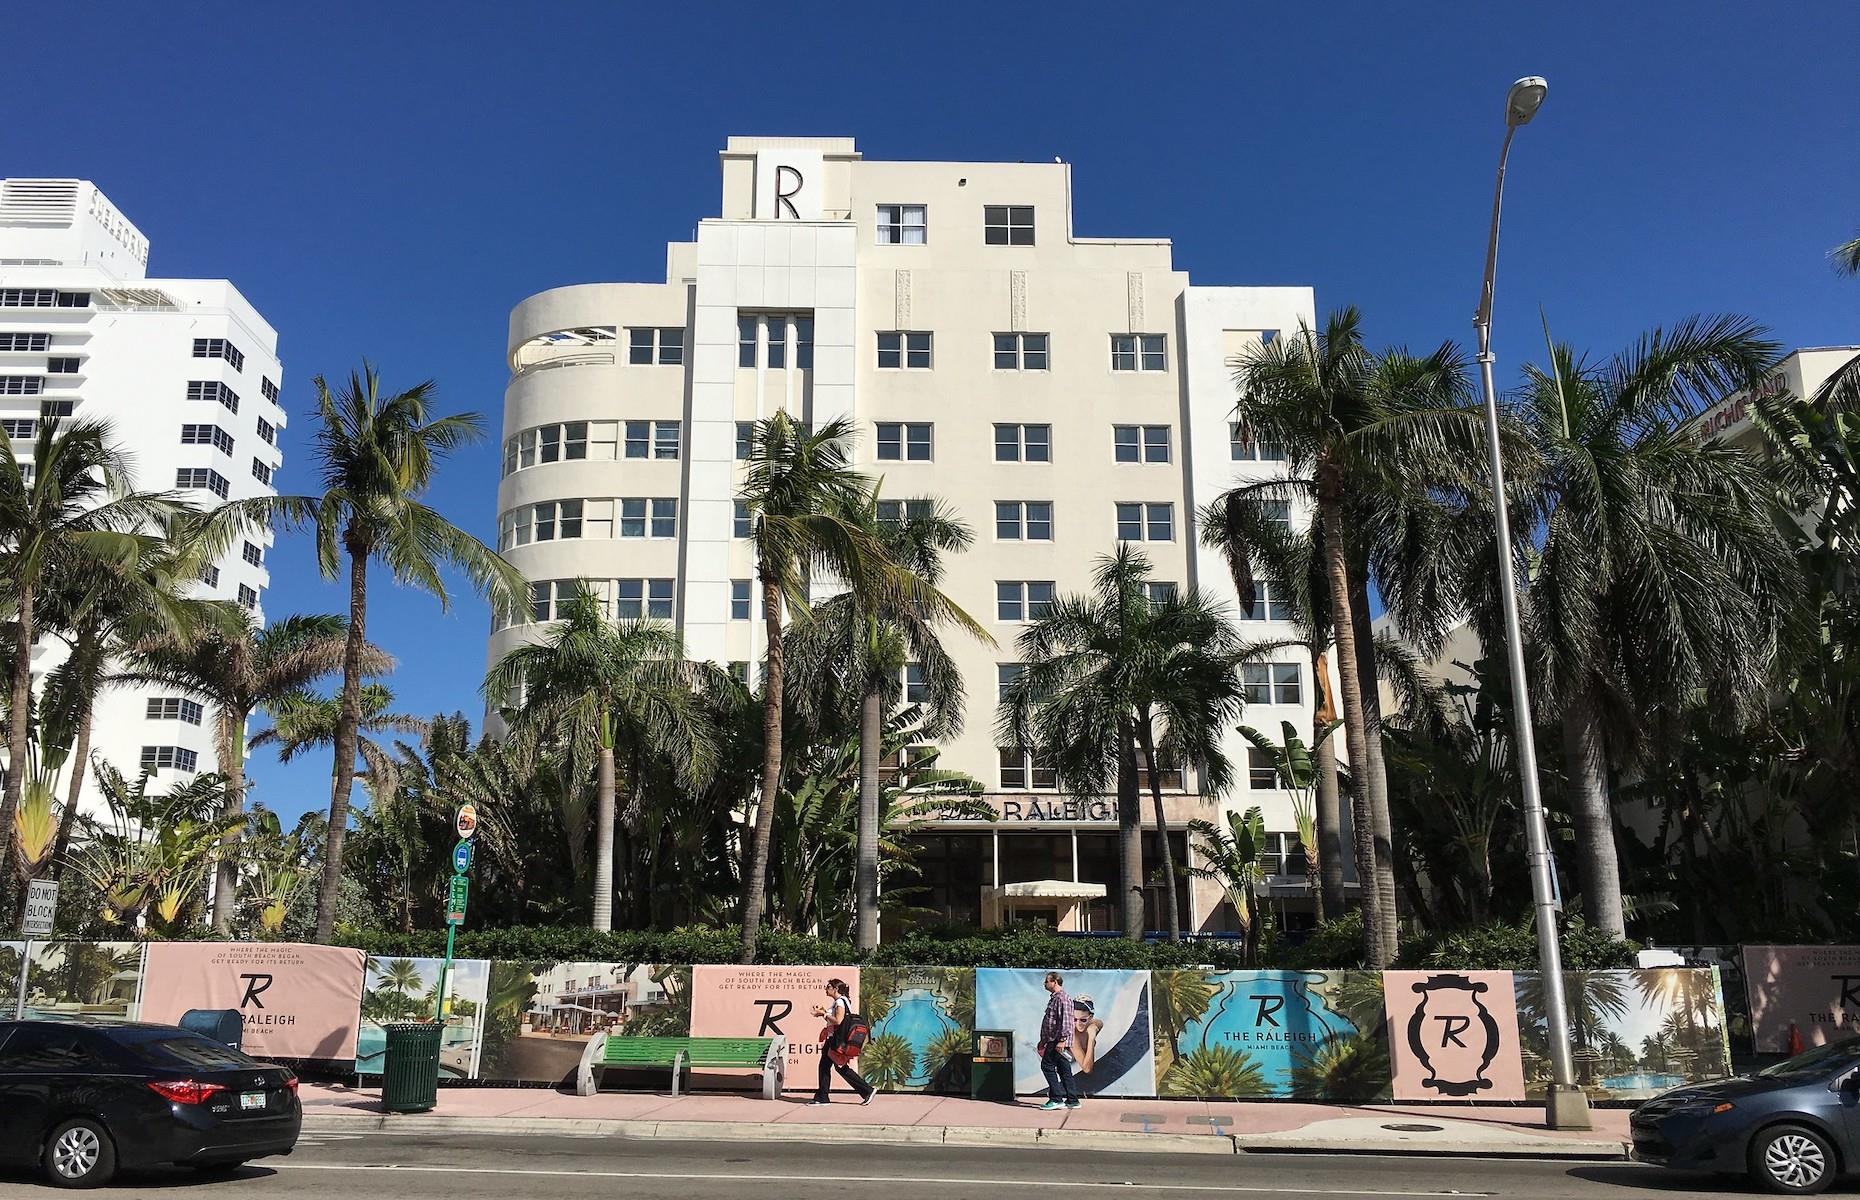 <p>A landmark oceanfront hotel constructed in the 1940s in what’s now known as the Art Deco District, the Raleigh was the work of local architect Lawrence Murray Dixon. It sadly closed in 2017 after it was damaged by Hurricane Irma. However, the historic property is set to bloom once again when it reopens as <a href="https://www.rosewoodhotels.com/en/the-raleigh-miami">Rosewood The Raleigh</a> in 2025 after an epic restoration. Overseen by US architect Peter Marino, the revitalized Raleigh will incorporate the neighboring Richmond and South Seas hotels, whose stunning Art Deco façades will also be restored. Among the historic features being preserved are the Raleigh’s curvaceous swimming pool, said to have been Miami’s most iconic.</p>